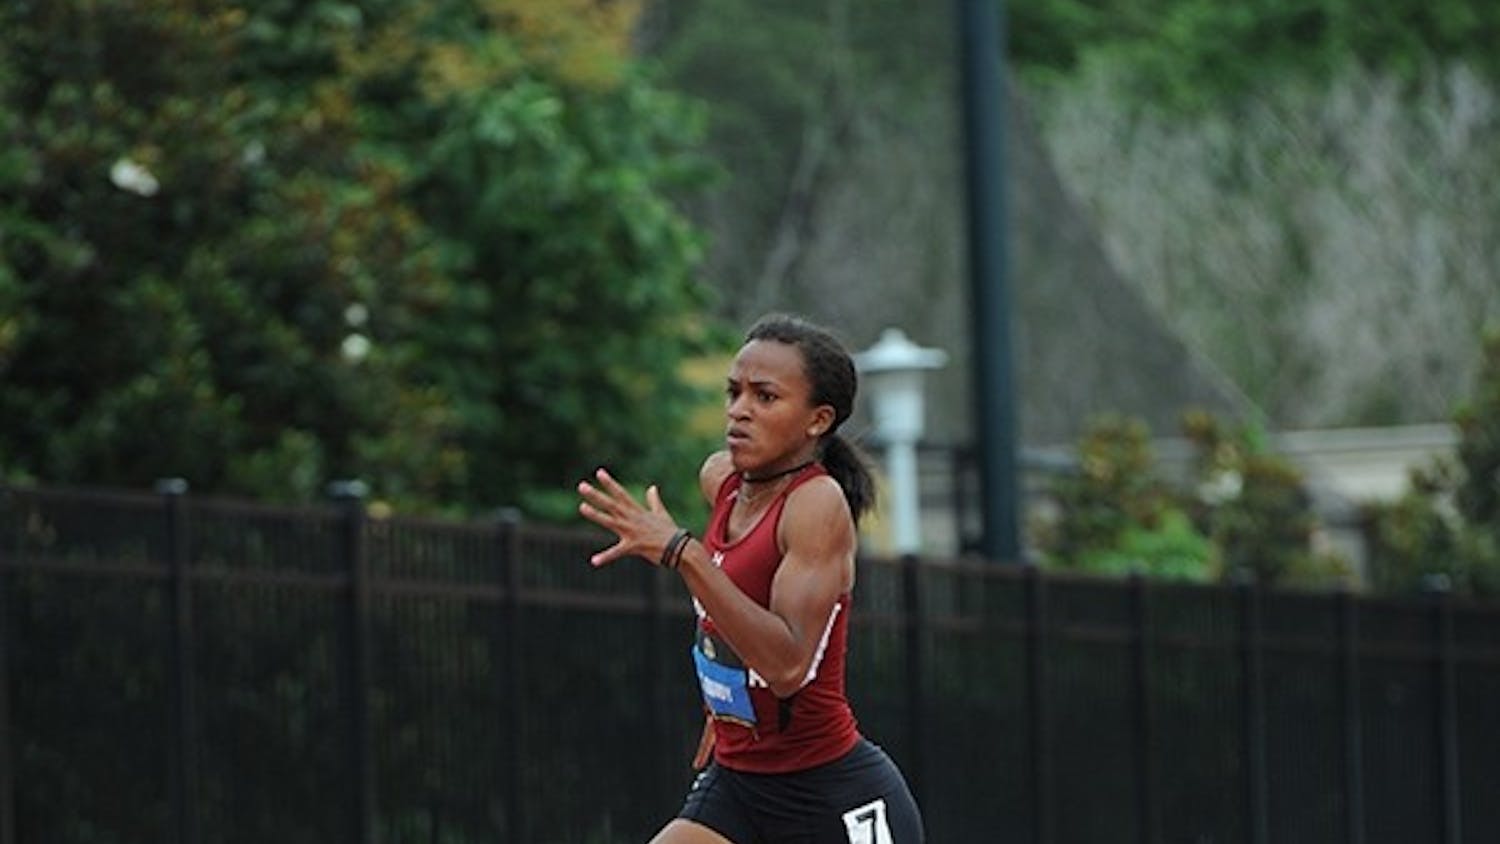 unior Vashti Bandy said she was pretty happy with her performance in the Hurricane Invitational last weekend, where she was part of a winning relay.